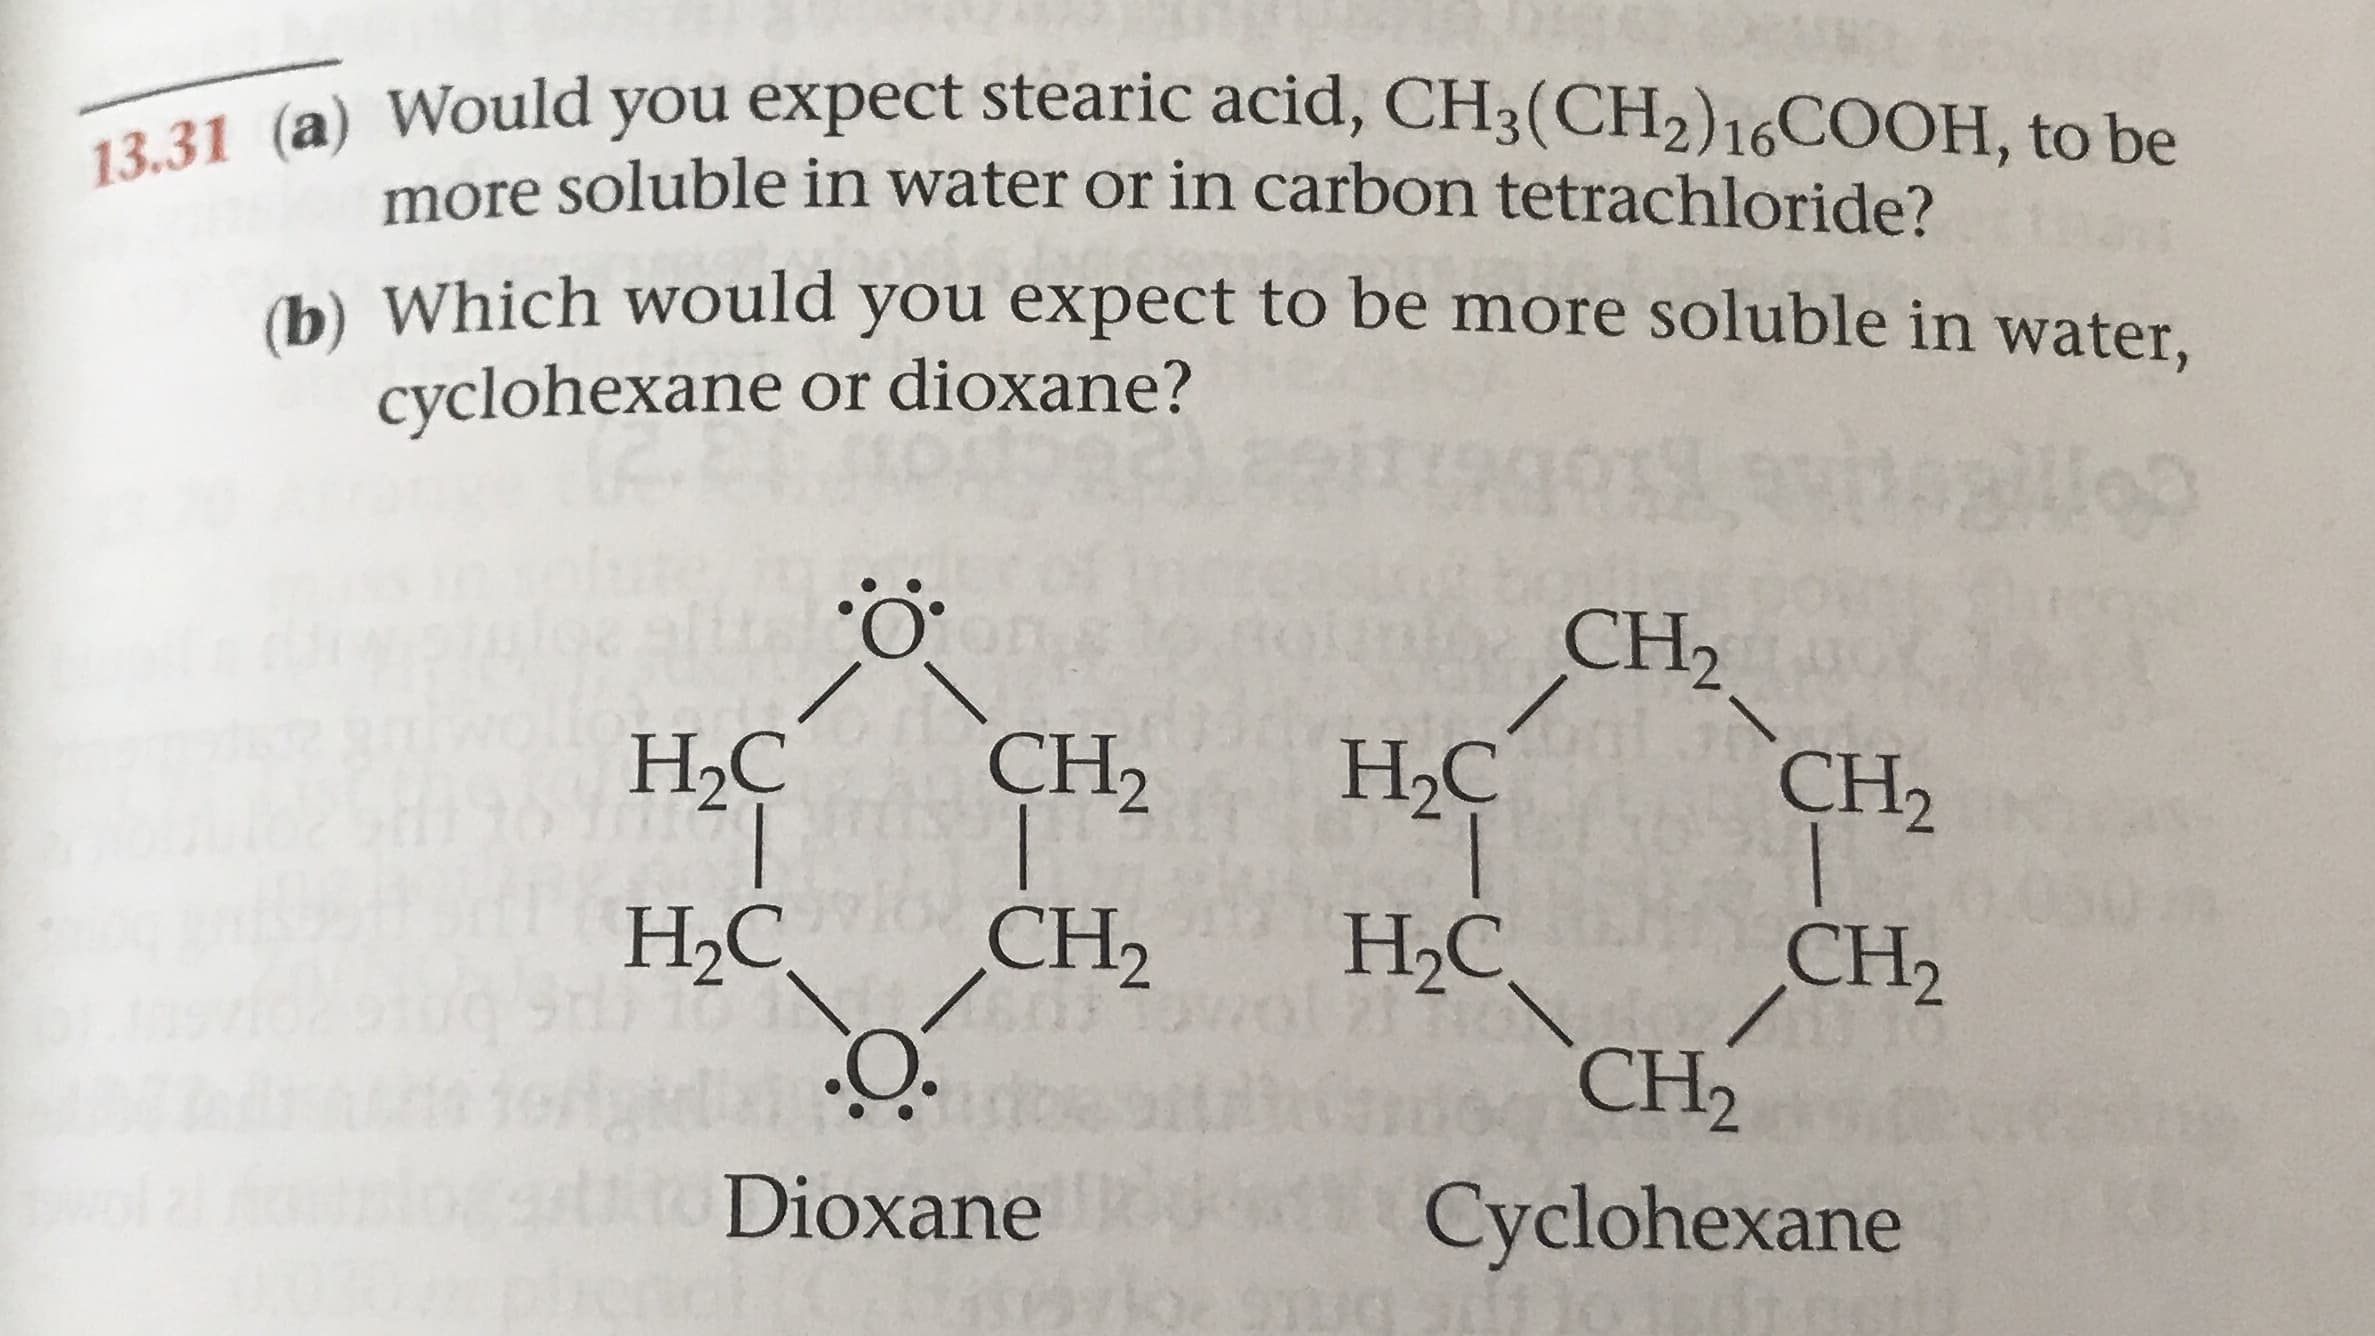 13.31 (a) Would you expect stearic acid, CH3(CH2)16COOH, to be
more soluble in water or in carbon tetrachloride?
(b) Which would you expect to be more soluble in water,
cyclohexane or dioxane?
PRAR ATDAo
о
CH2
CH2
Н.С
CH2
Н.С
68
НаС,
CH2
Н С
CH2
CH2
Dioxane
Cyclohexane
loe 9 G
